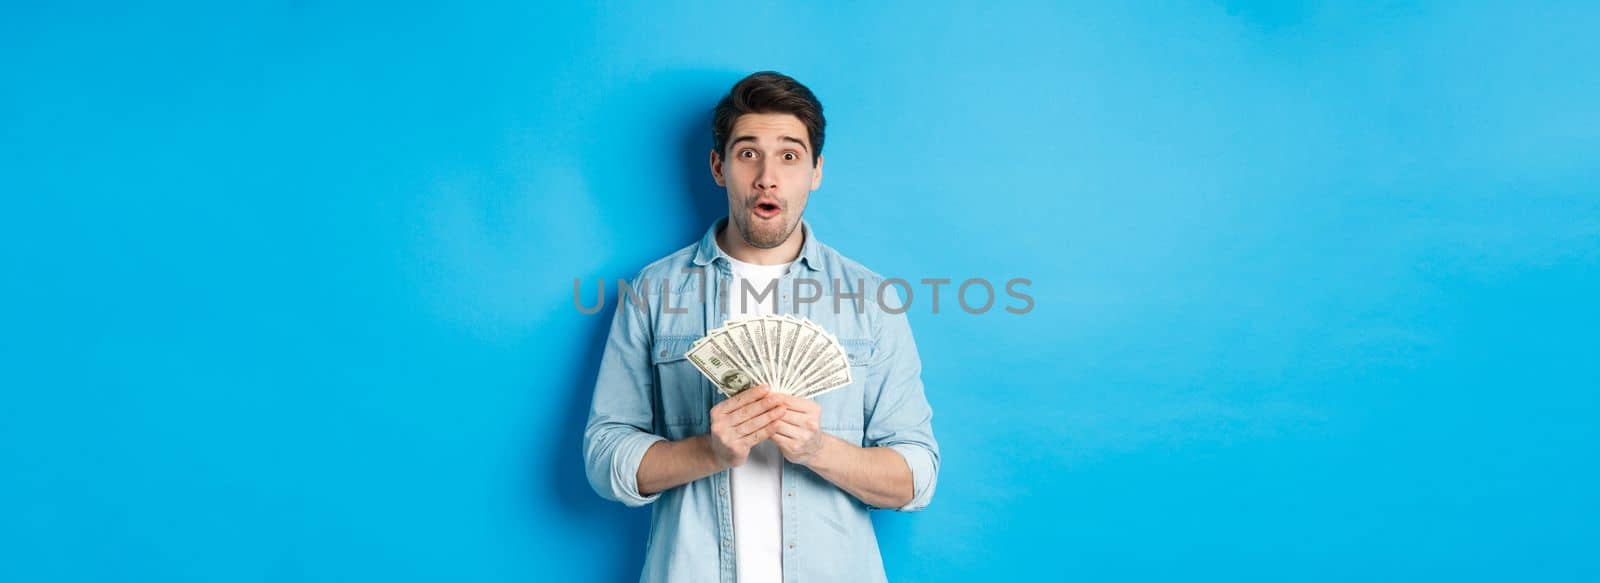 Concept of finance, credit and banking. Surprised man holding money, looking at camera wondered, standing over blue background.